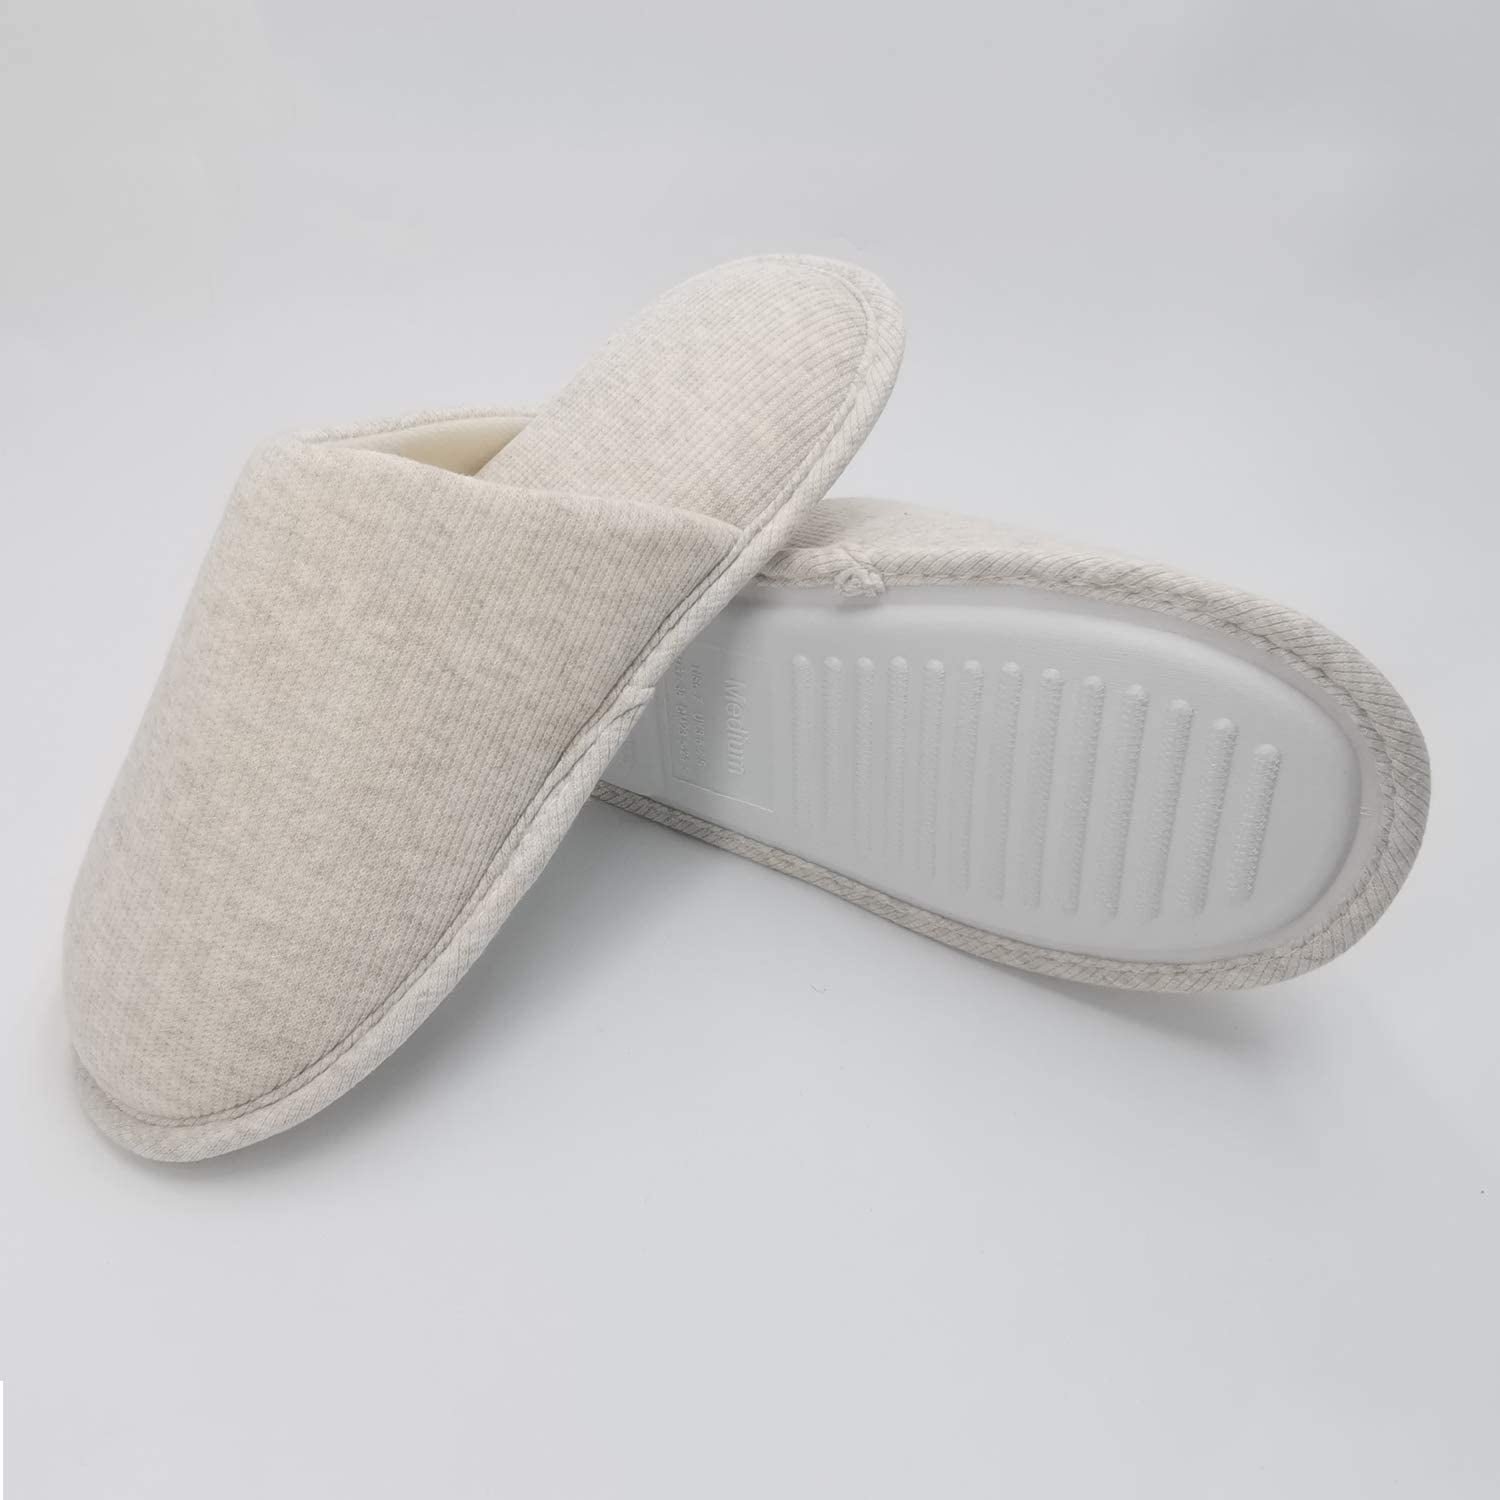 ofoot Womens Organic Cotton Non Slip House Slippers,Cozy Memory Foam Washable for Summer Bedroom,Rubber Sole